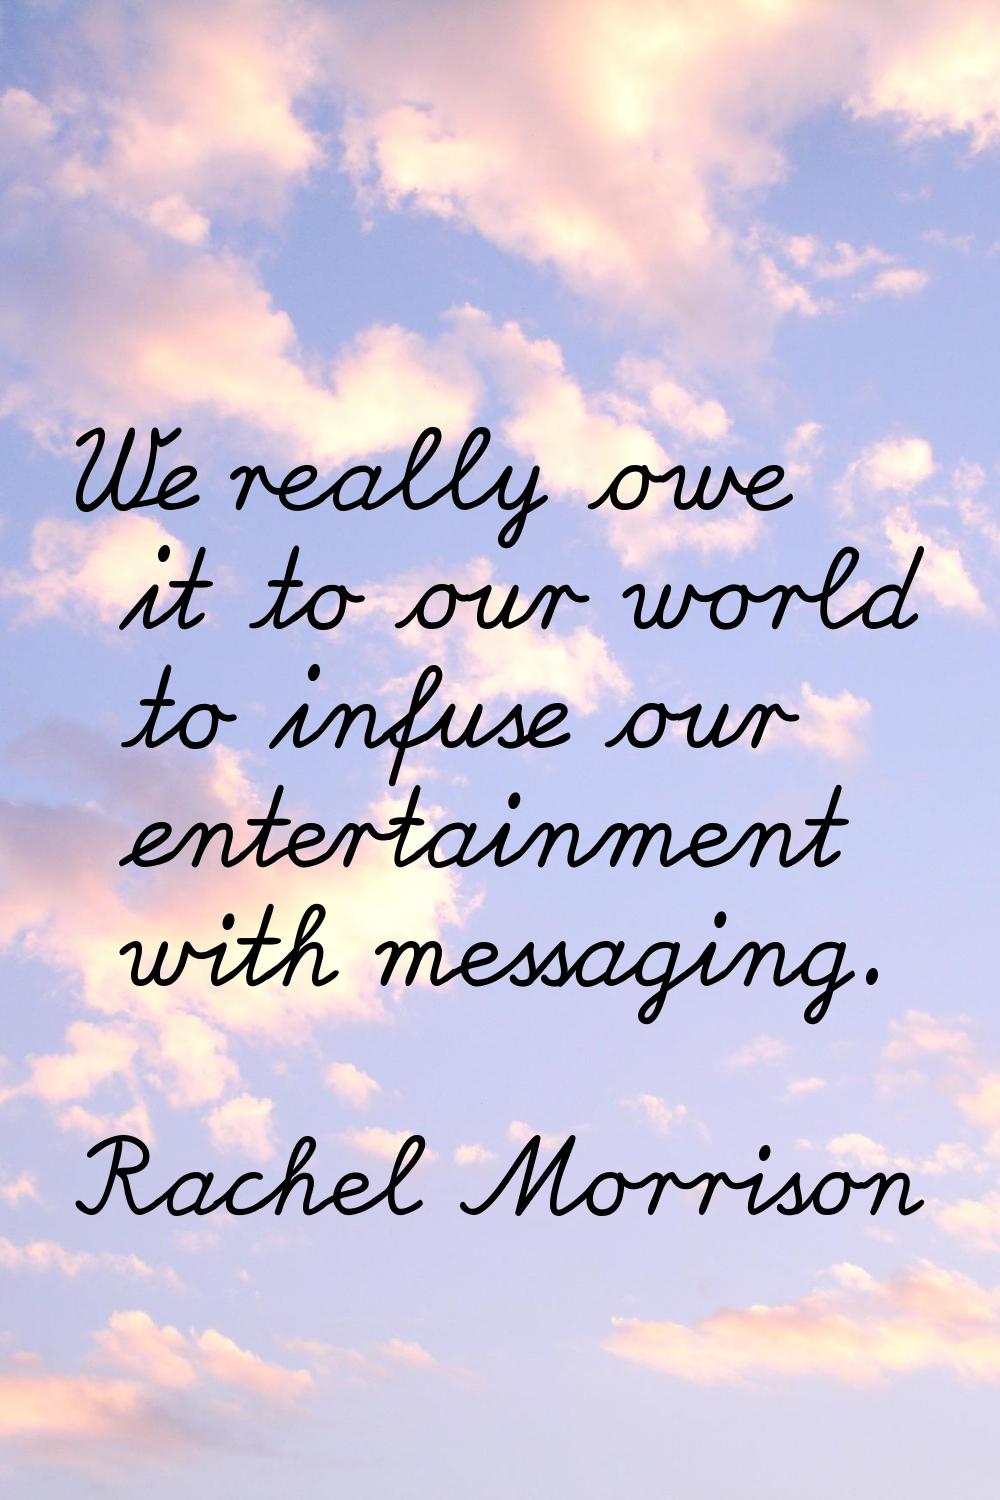 We really owe it to our world to infuse our entertainment with messaging.